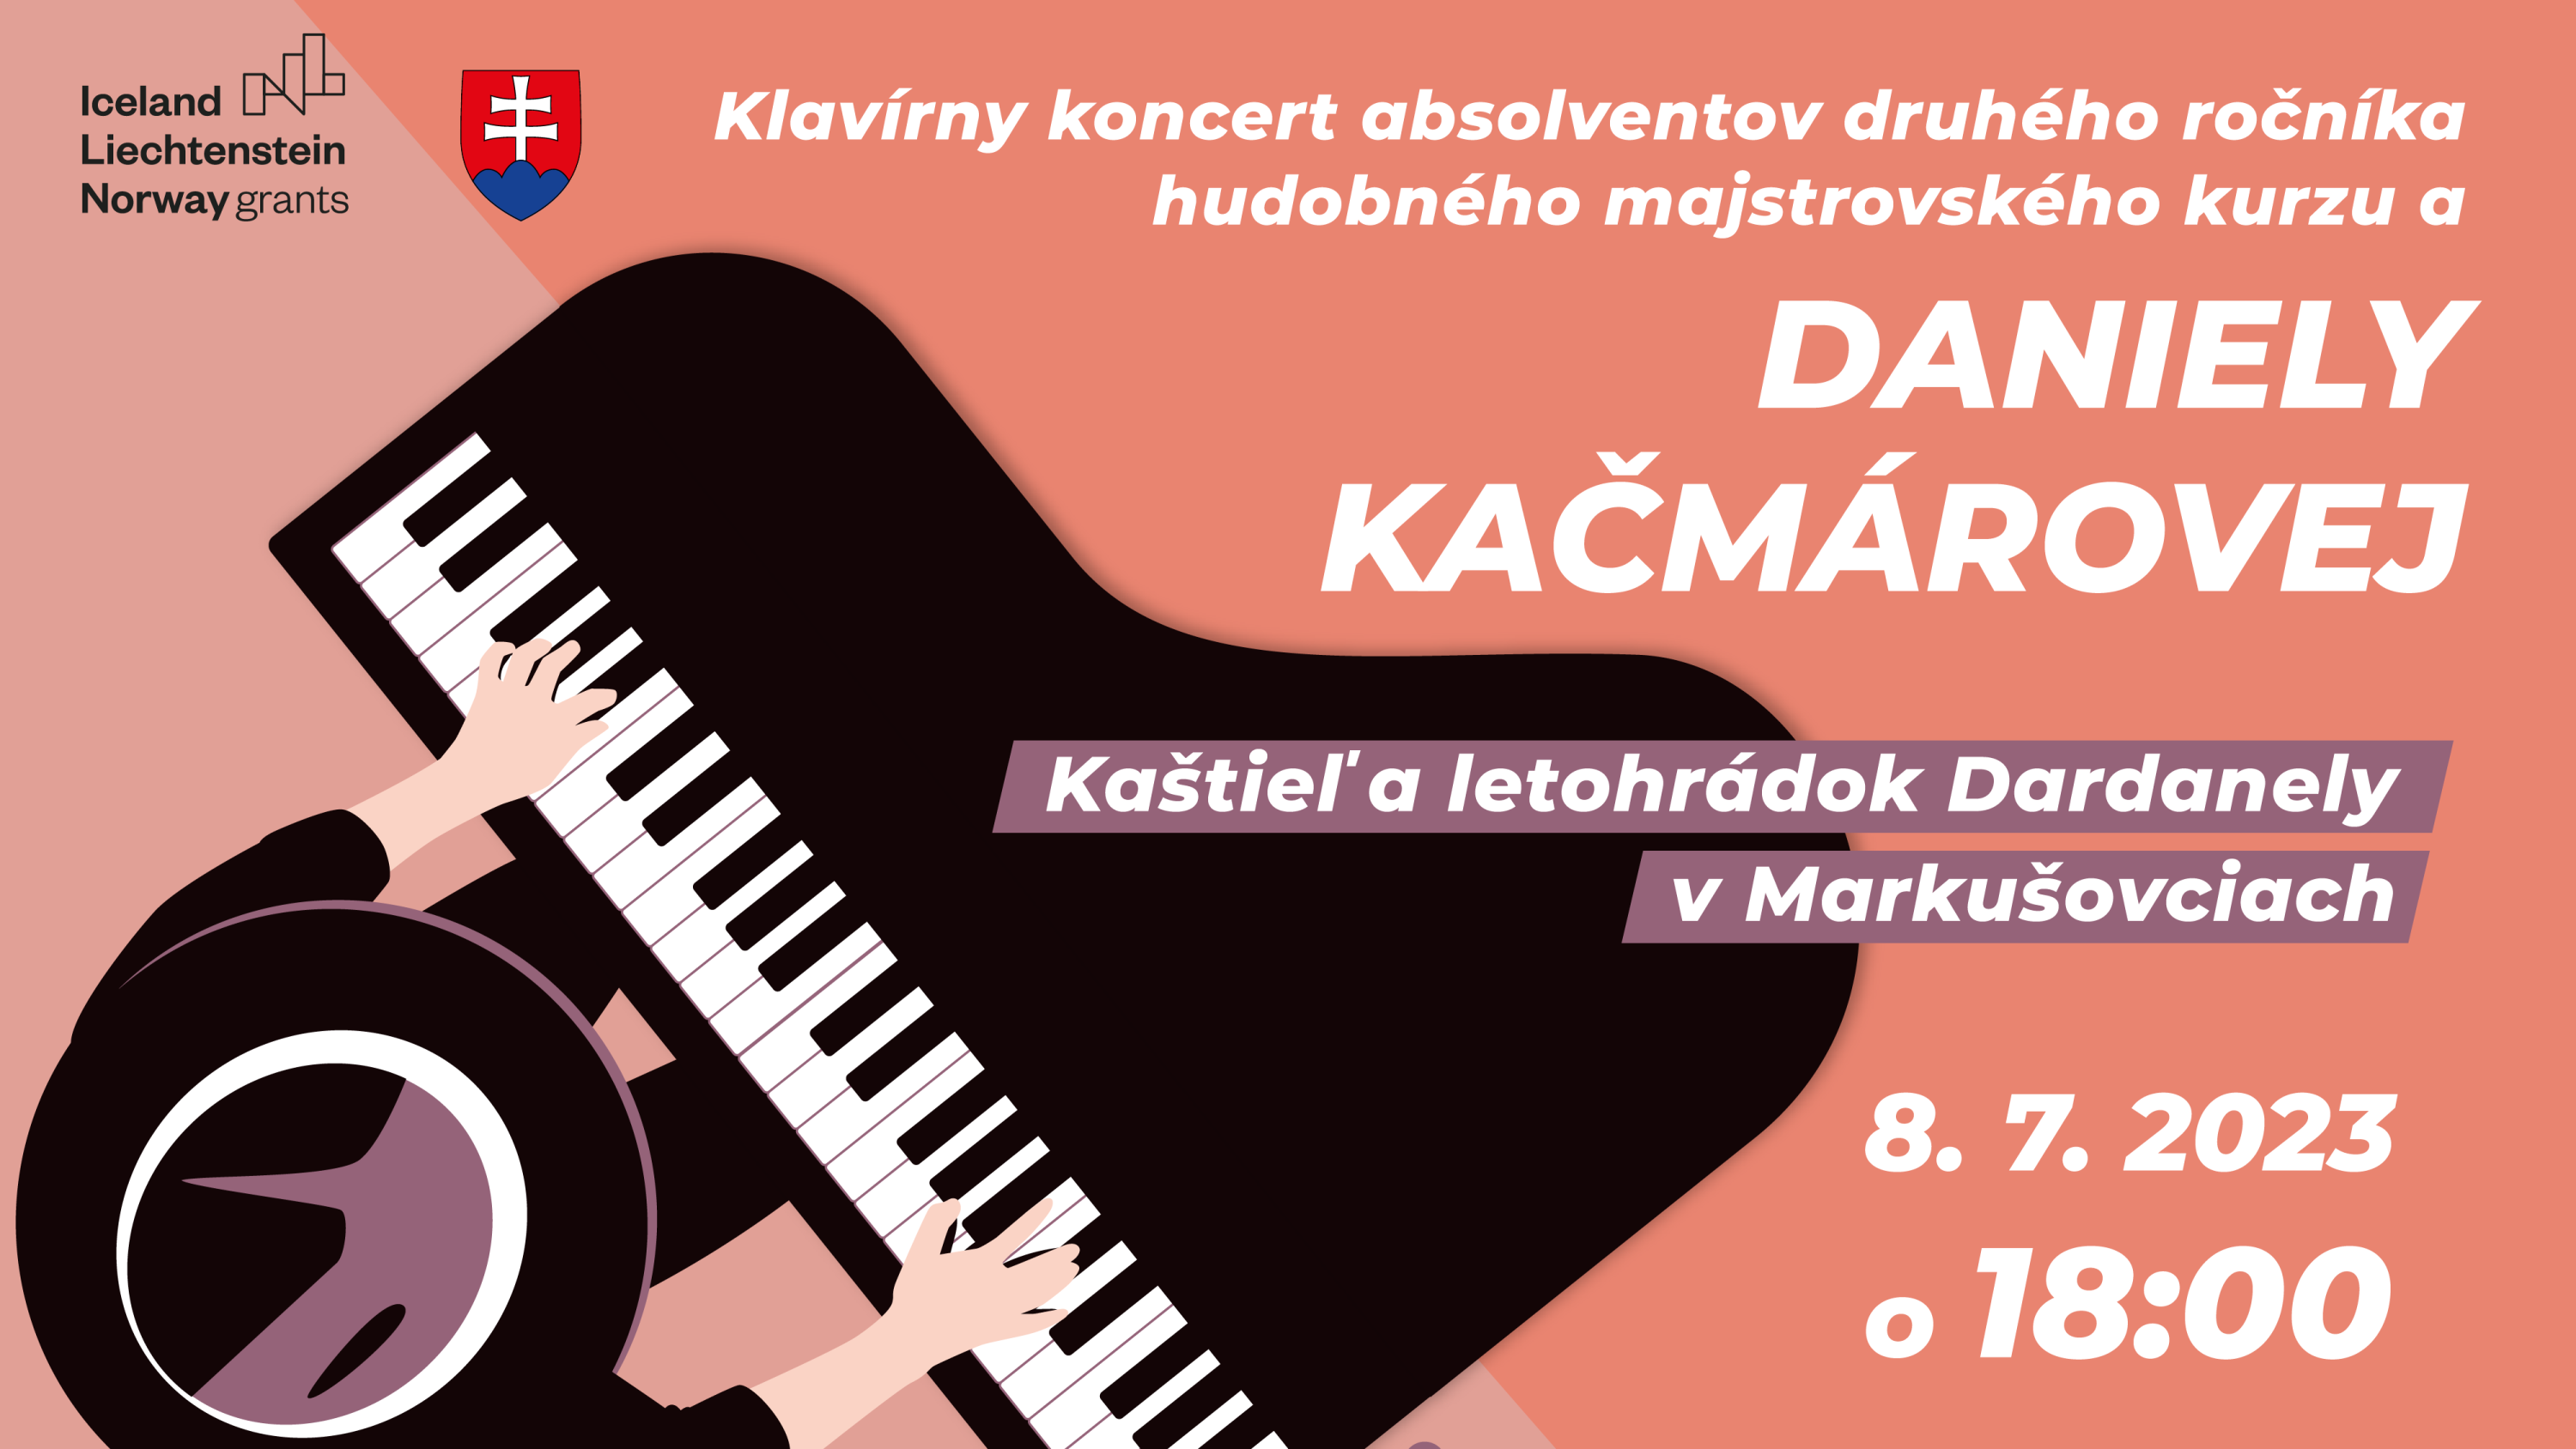 Graphic processing of the invitation to the concert web version. Author: V. Krempaský